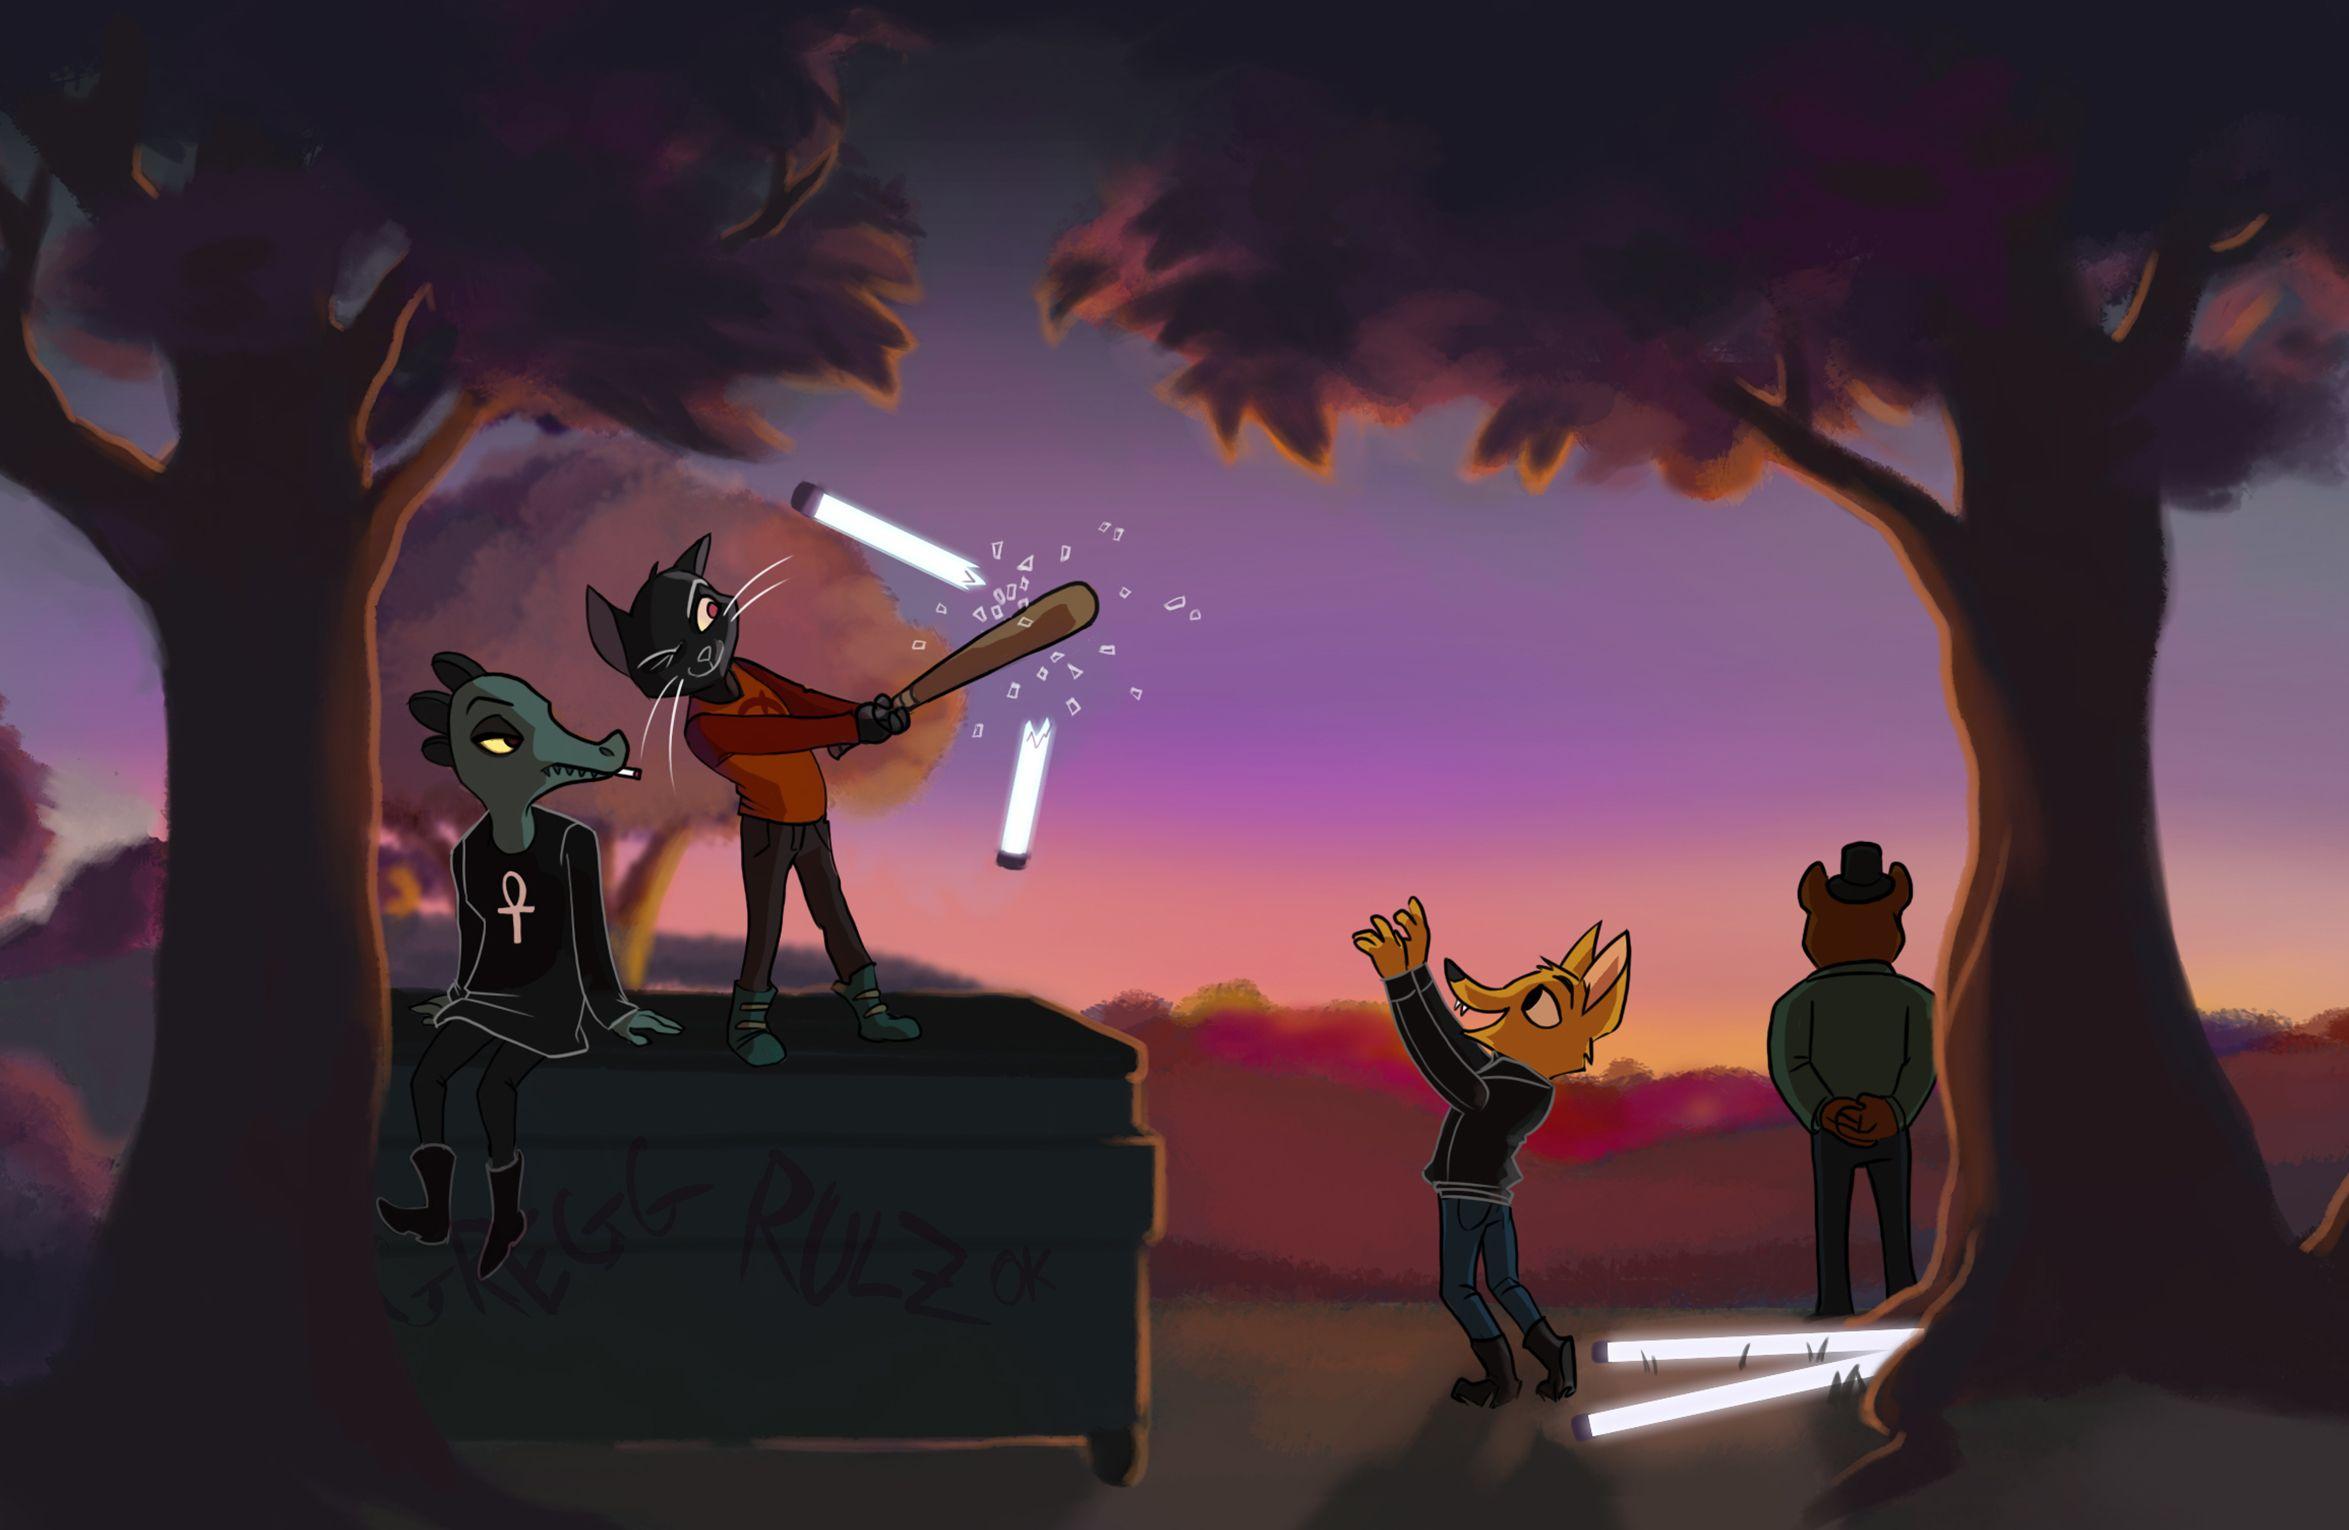 I'd love some Wallpaper for Night in the Woods - Wallpaper Engine